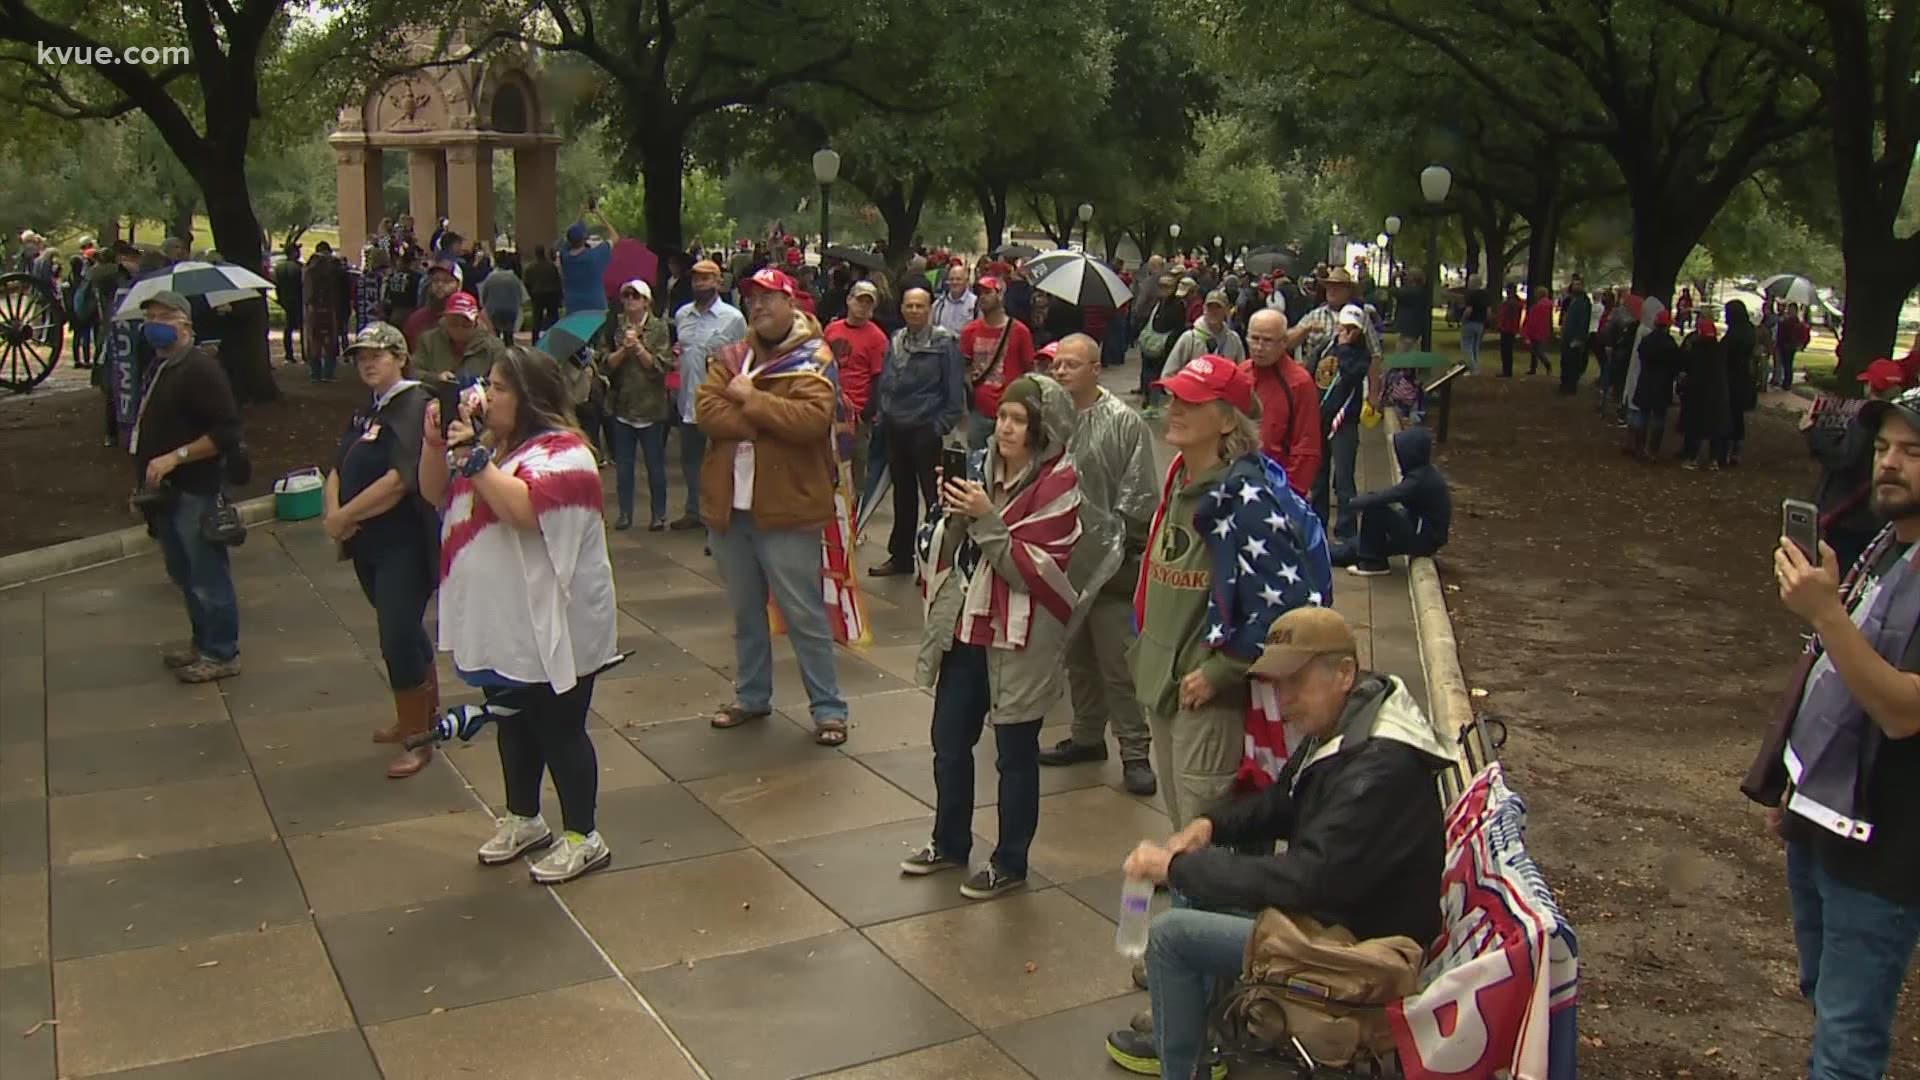 The Texas Capitol grounds are closed after a protest filled the area around Eleventh Street and Congress Avenue.